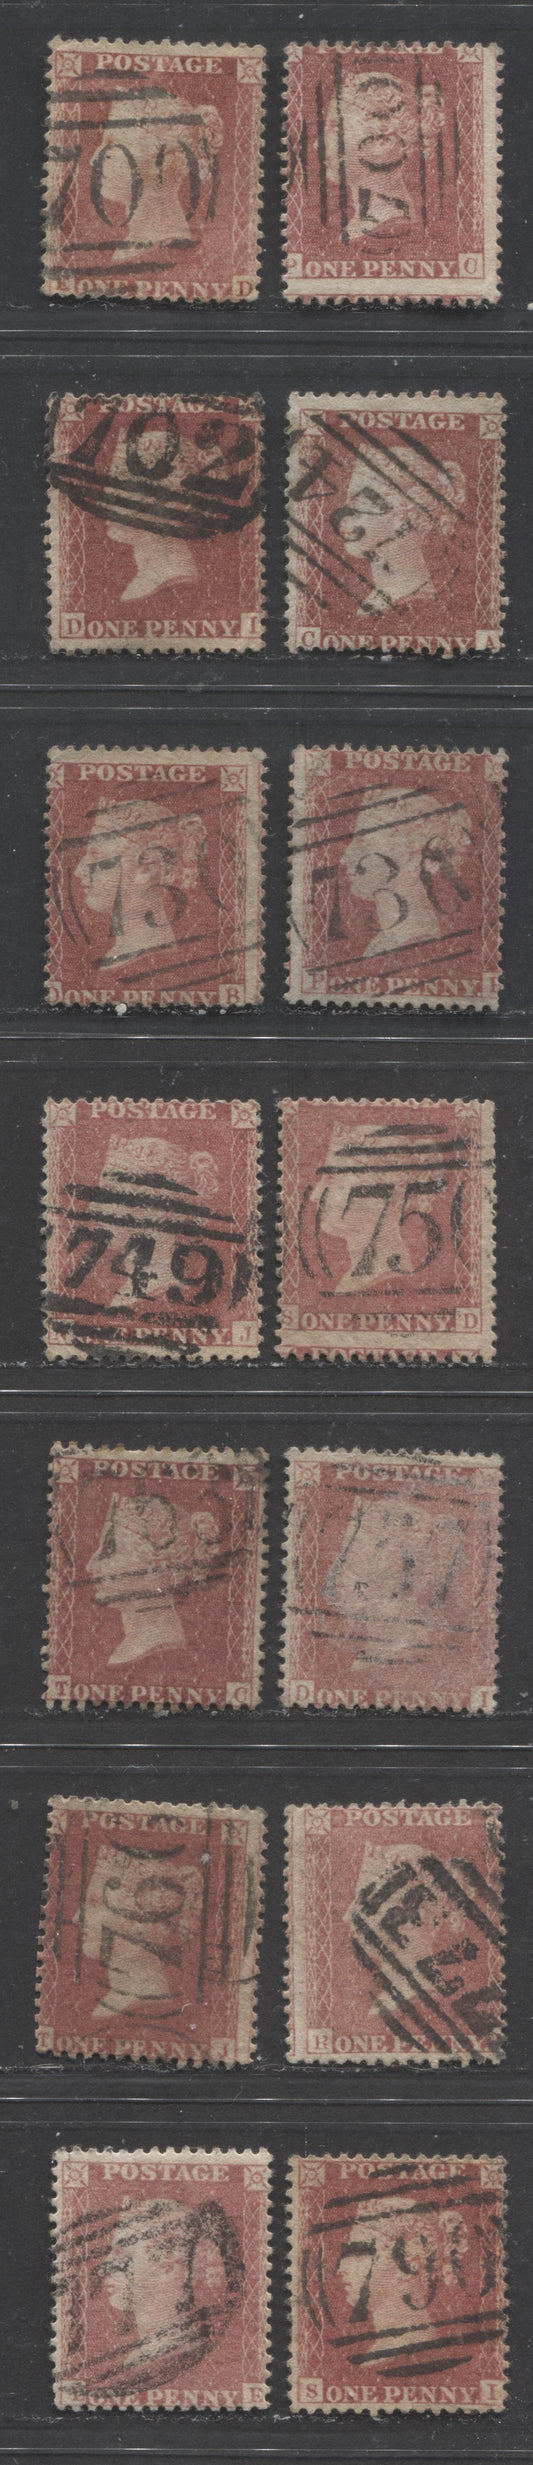 Lot  465 Great Britain - Barred Numeral Cancels For England & Wales: 700-799 SC#20 1d Rose Red & Deep Rose Red 1857-1863 1d Red Stars, Large Crown, White Paper, Perf. 14 Issue, #700/#790, 14 Good & VG Used Singles, Estimated Value $80